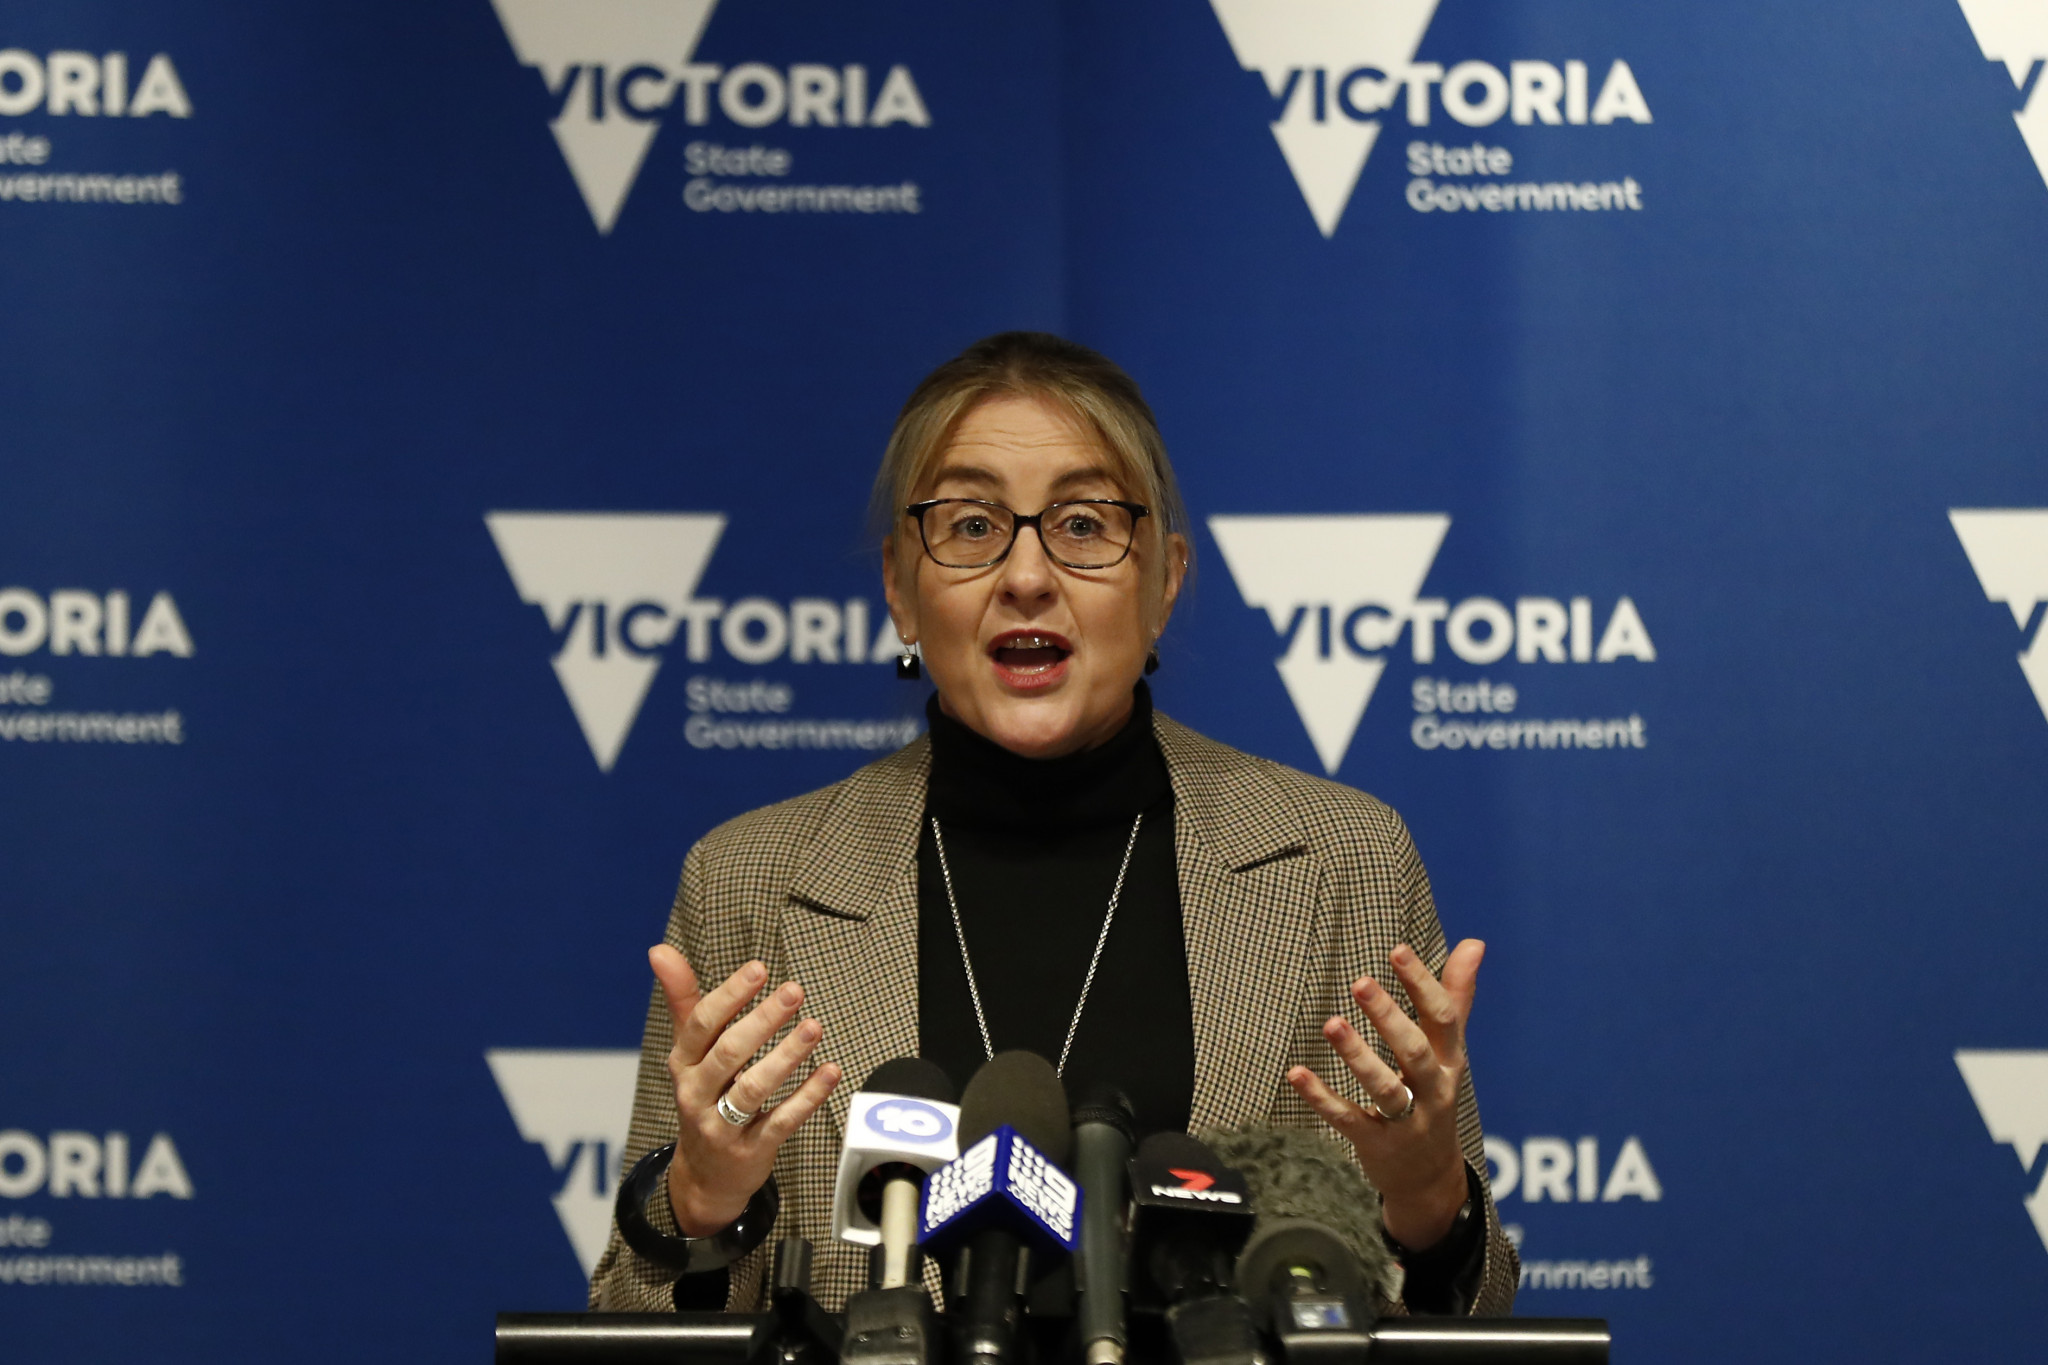 Jacinta Allan has been appointed as Victoria's Minister for Commonwealth Games Delivery ©Getty Images